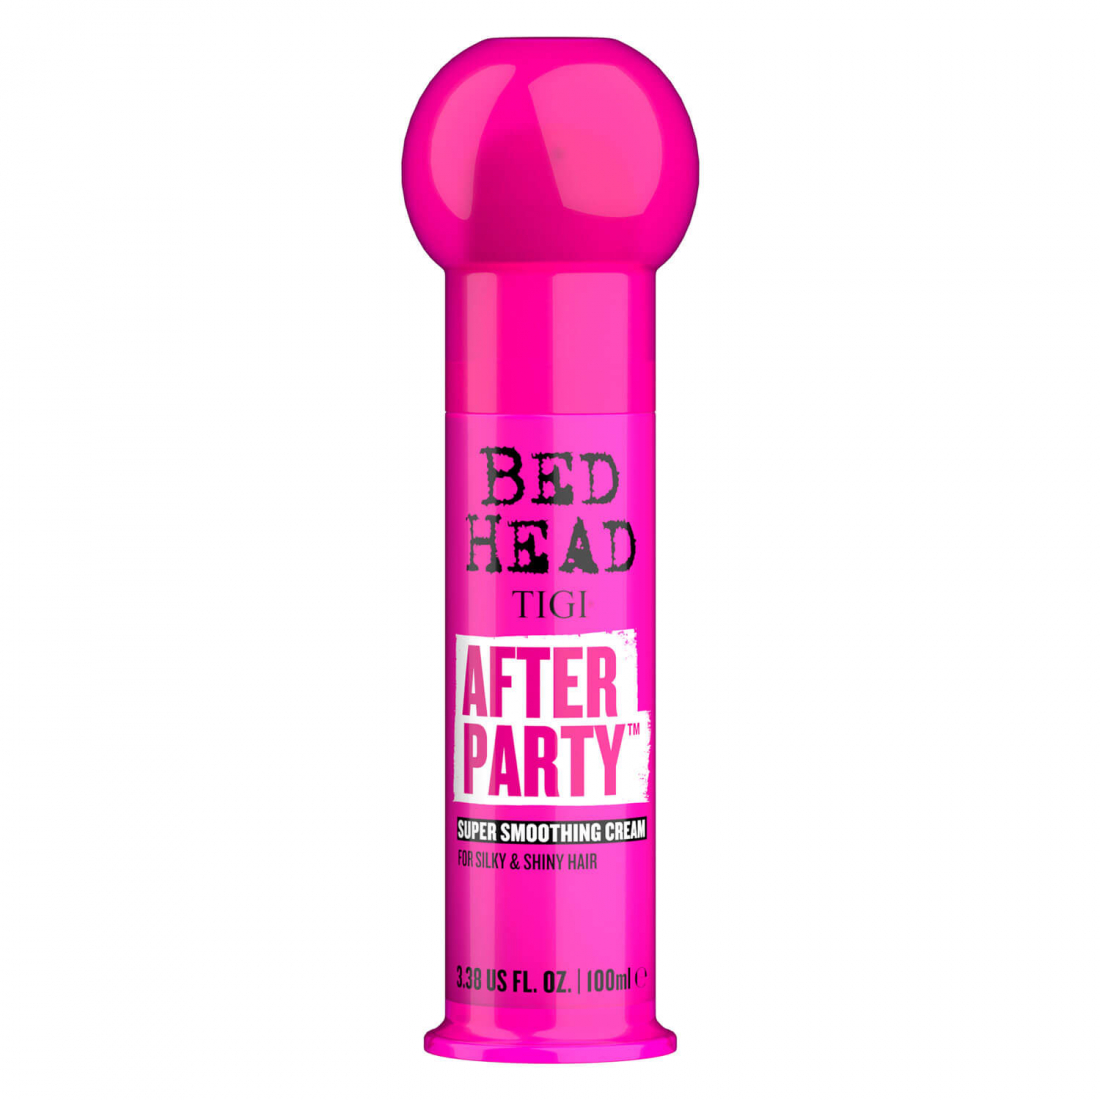 'Bed Head After Party' Hair Cream - 100 ml